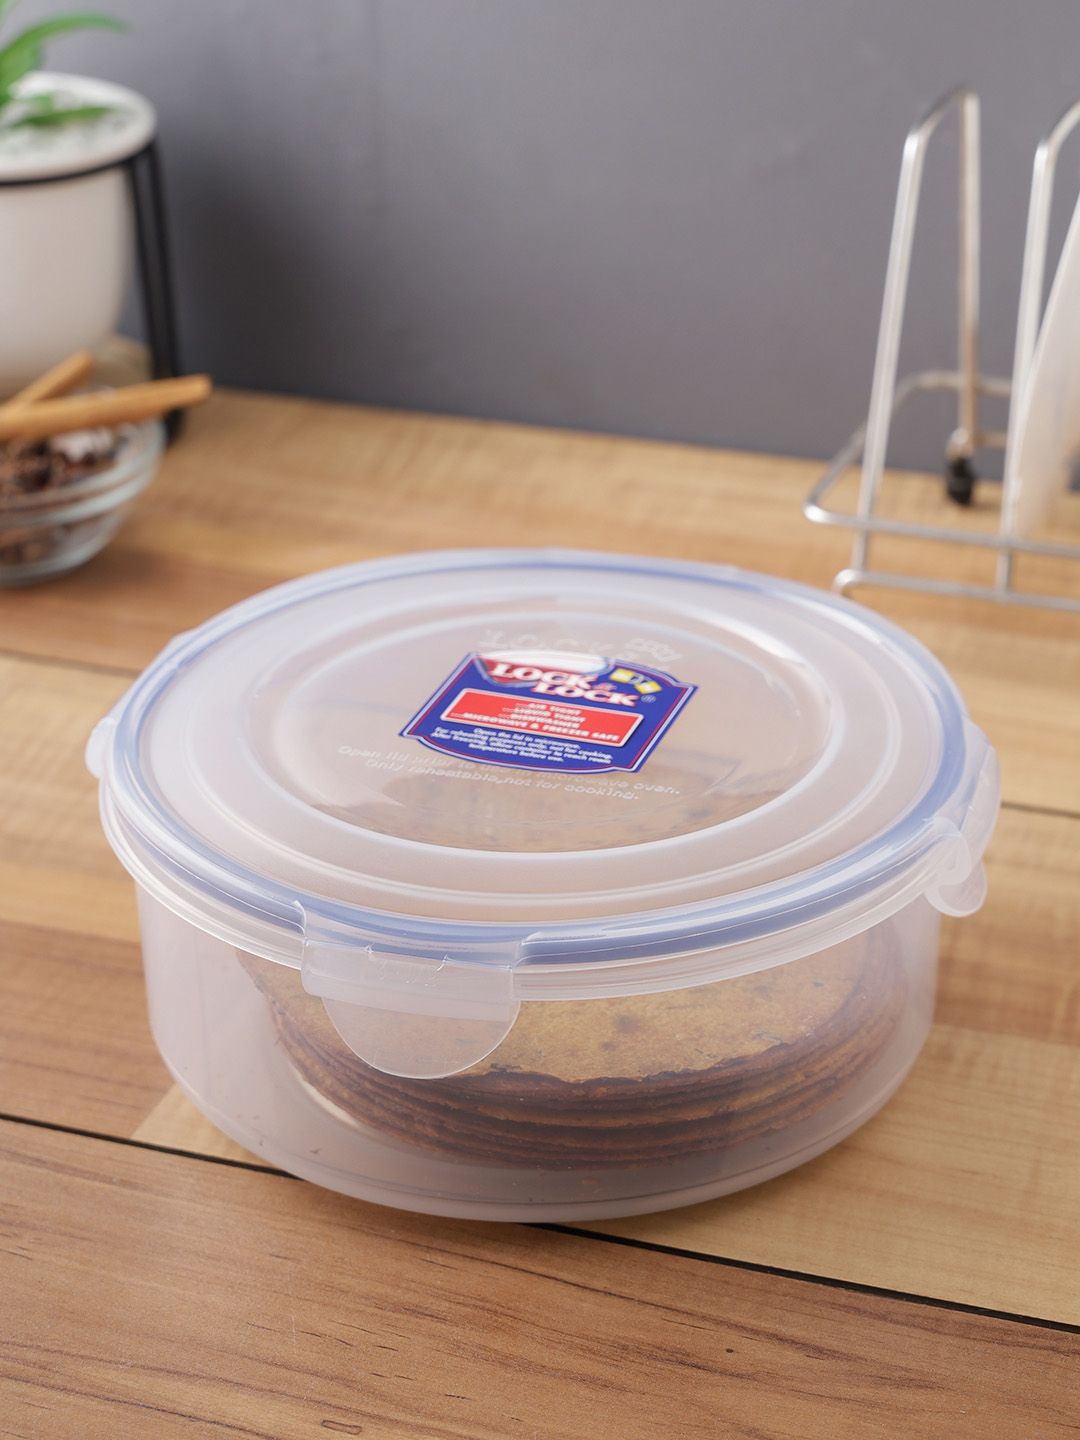 Lock & Lock Transparent Plastic Airtight Food Storage Container With Leakproof Lid 1.2 L Price in India